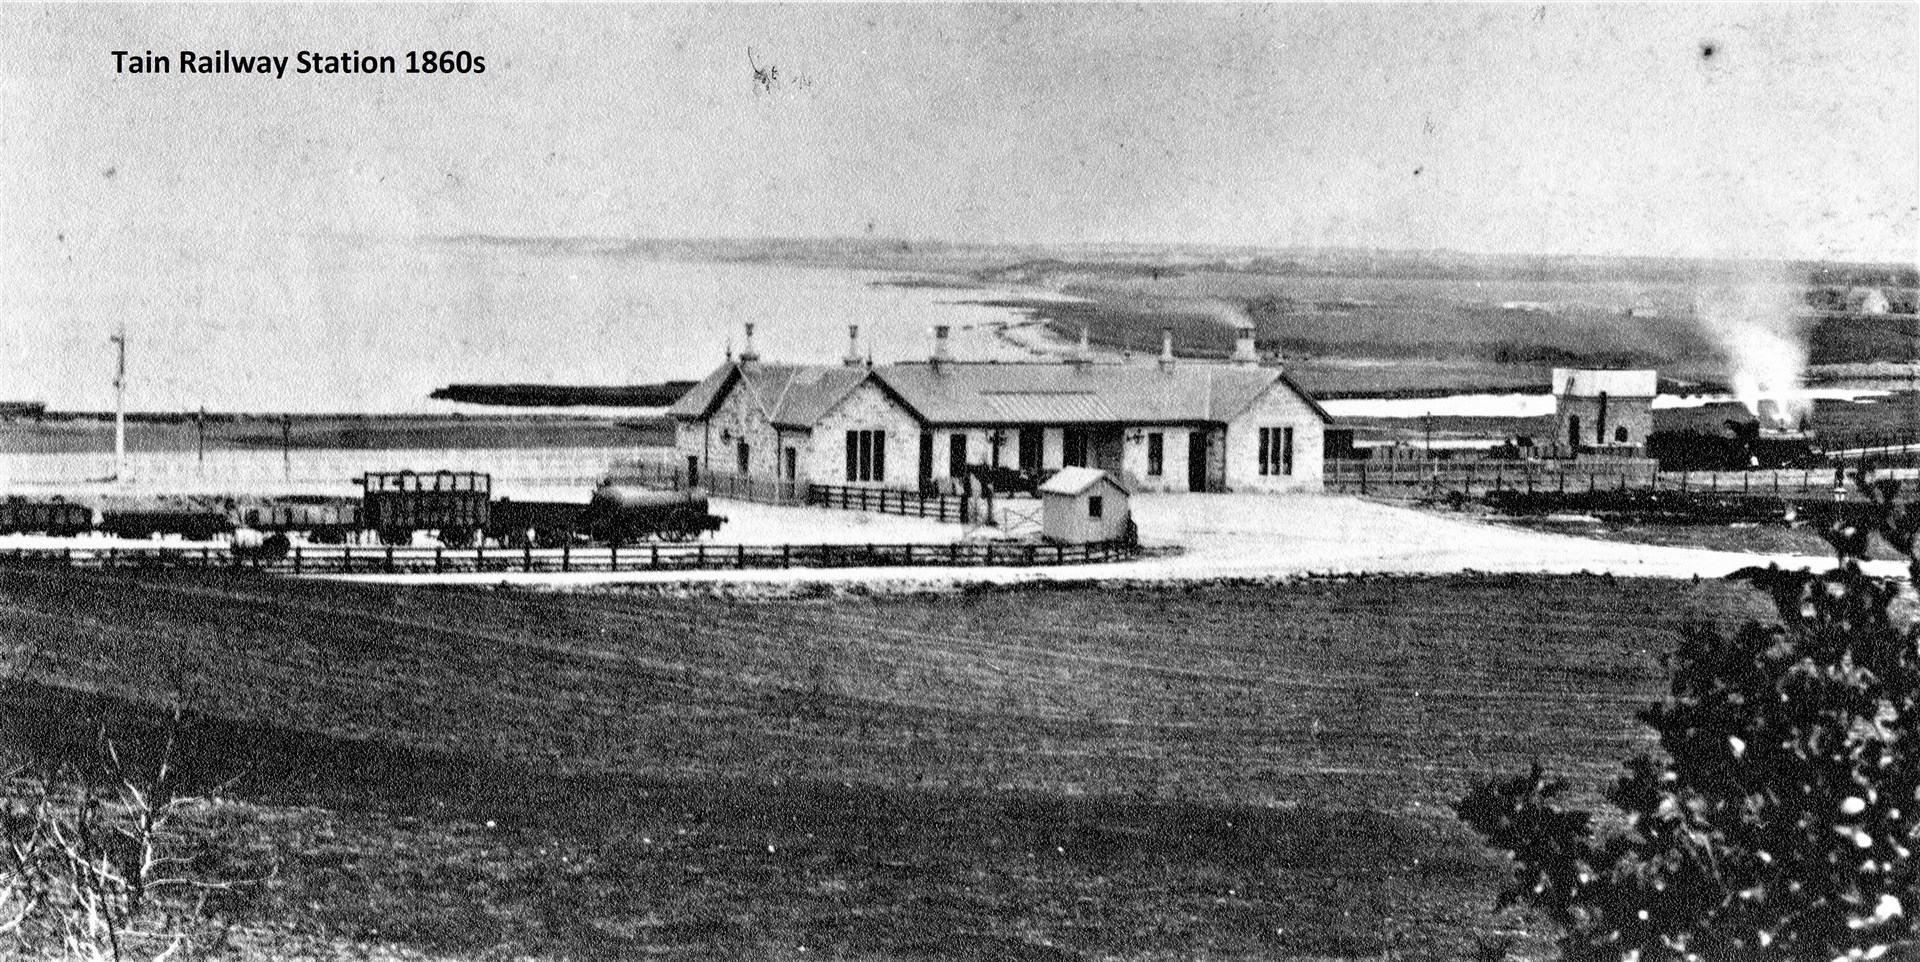 Tain Railway Station in the 1860s.